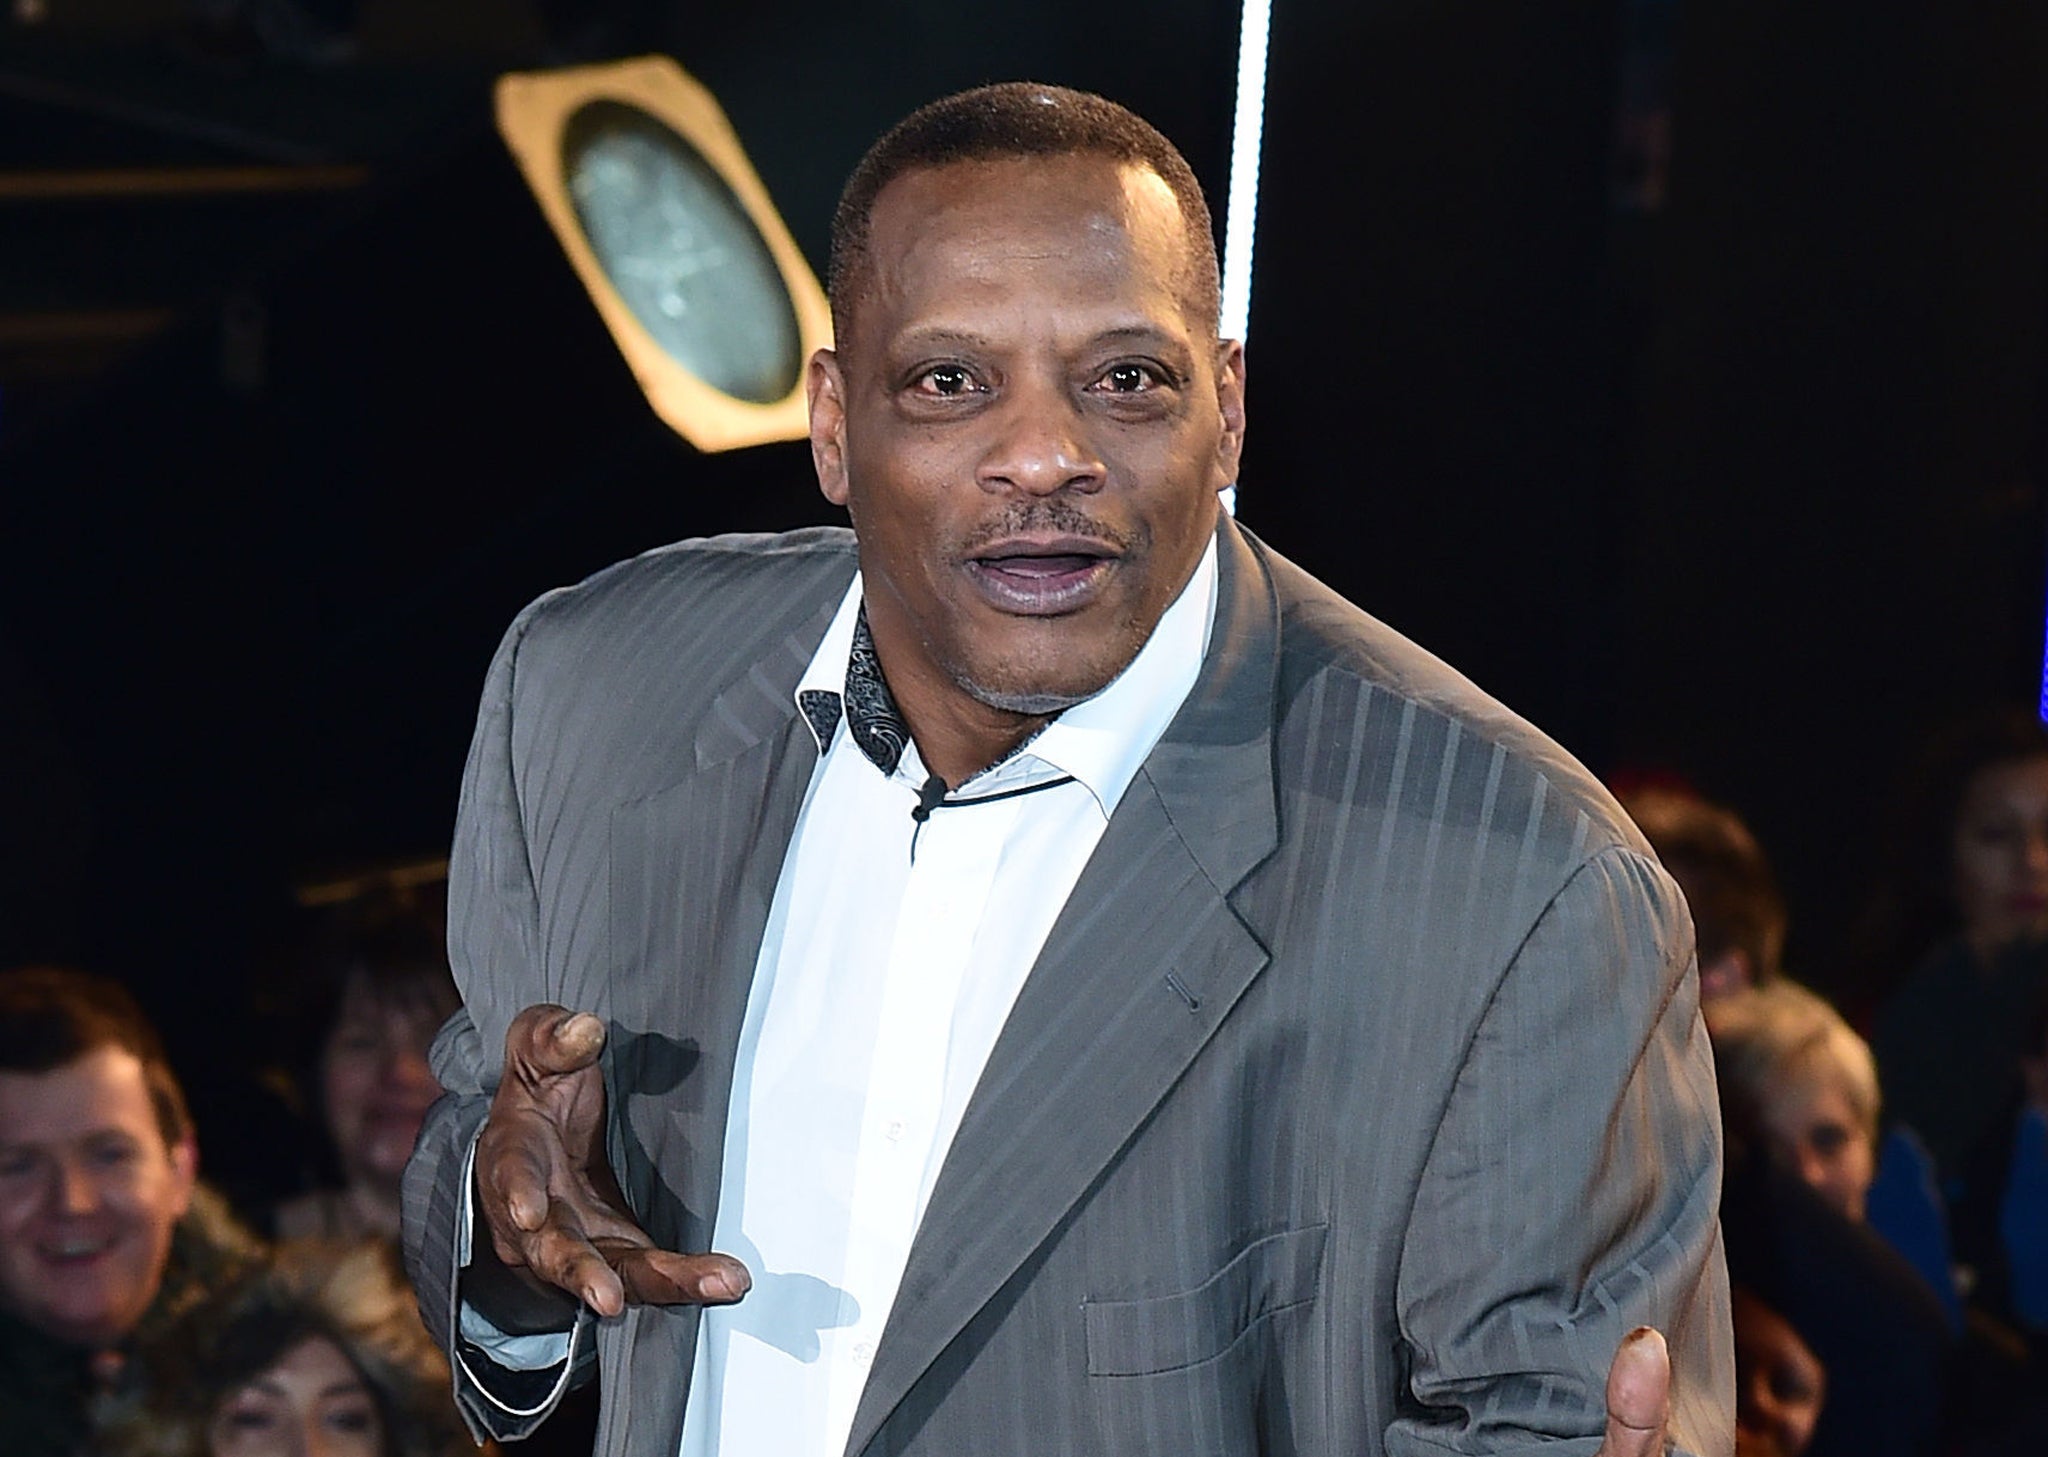 Alexander O'Neal exits the Celebrity Big Brother house